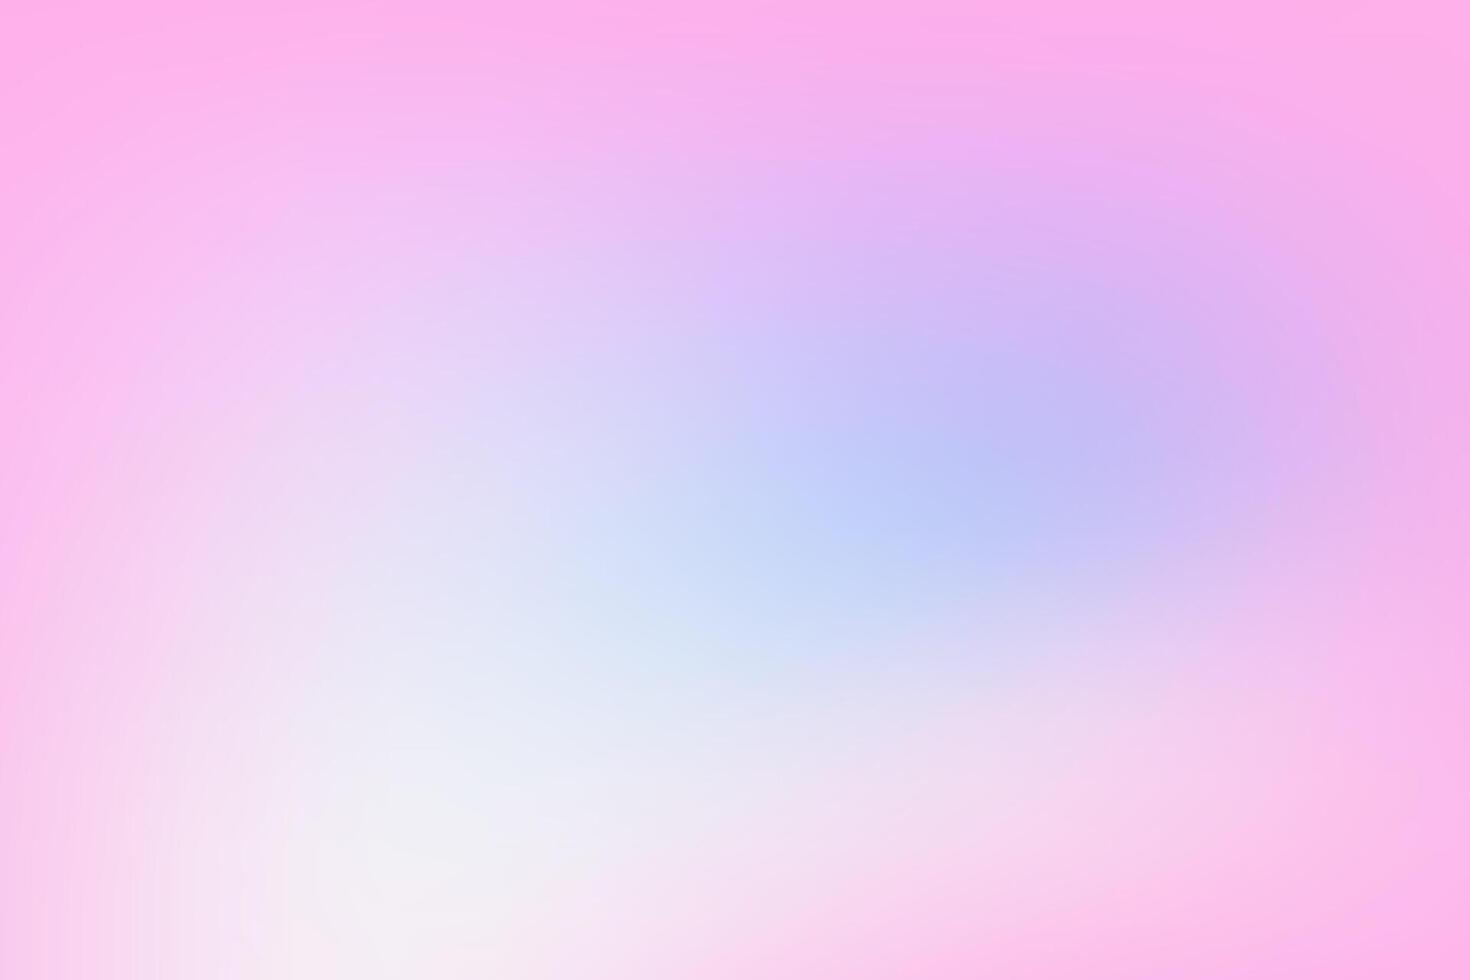 Colorful Gradient Blur Background for Mobile Wallpaper vector